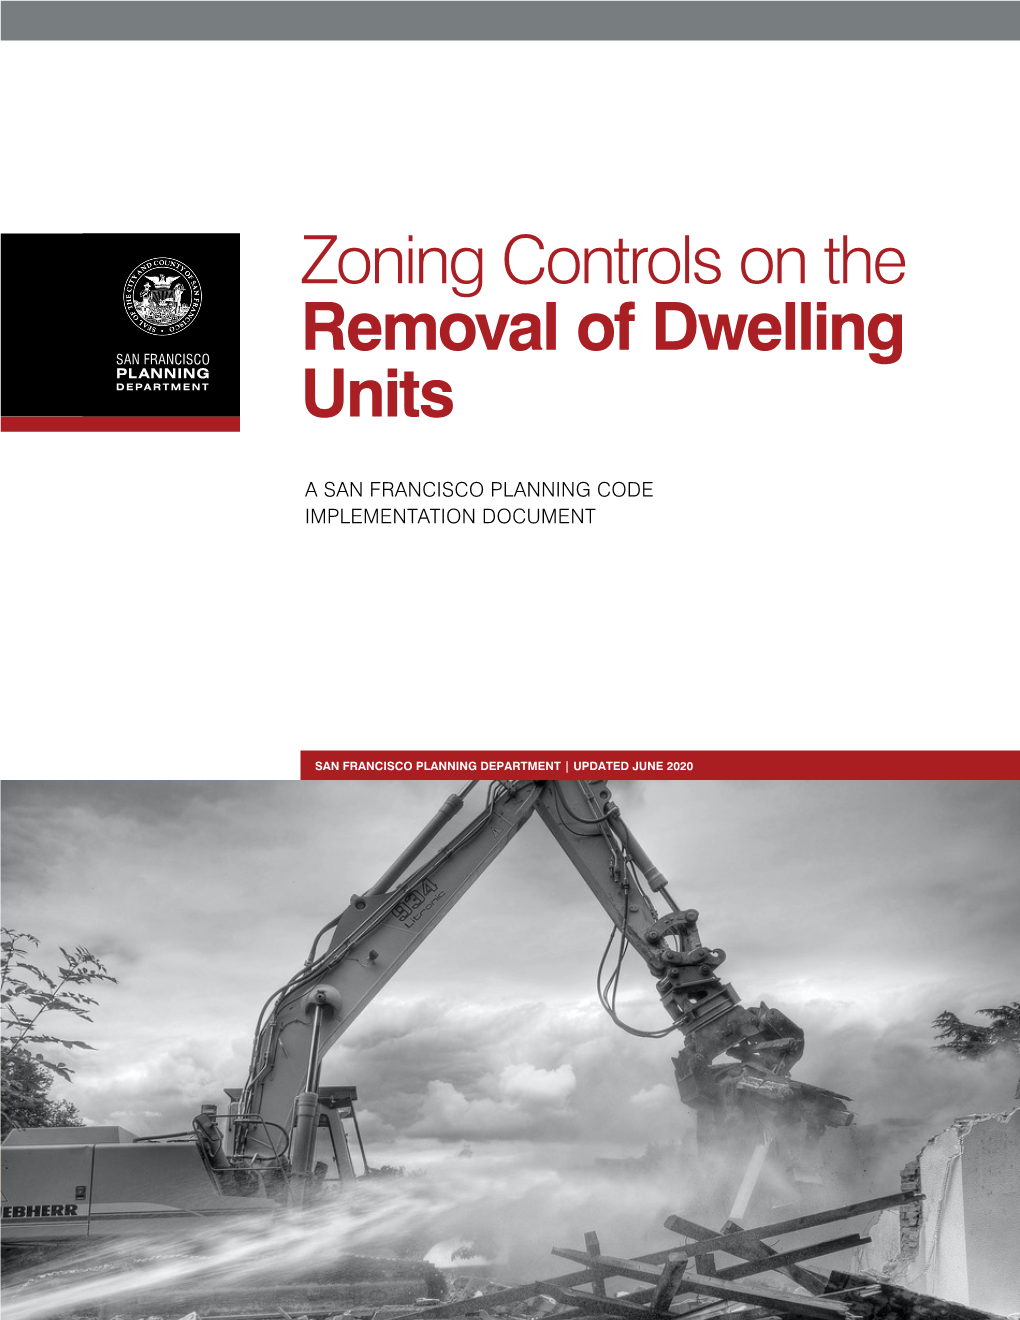 Zoning Controls on the Removal of Dwelling Units